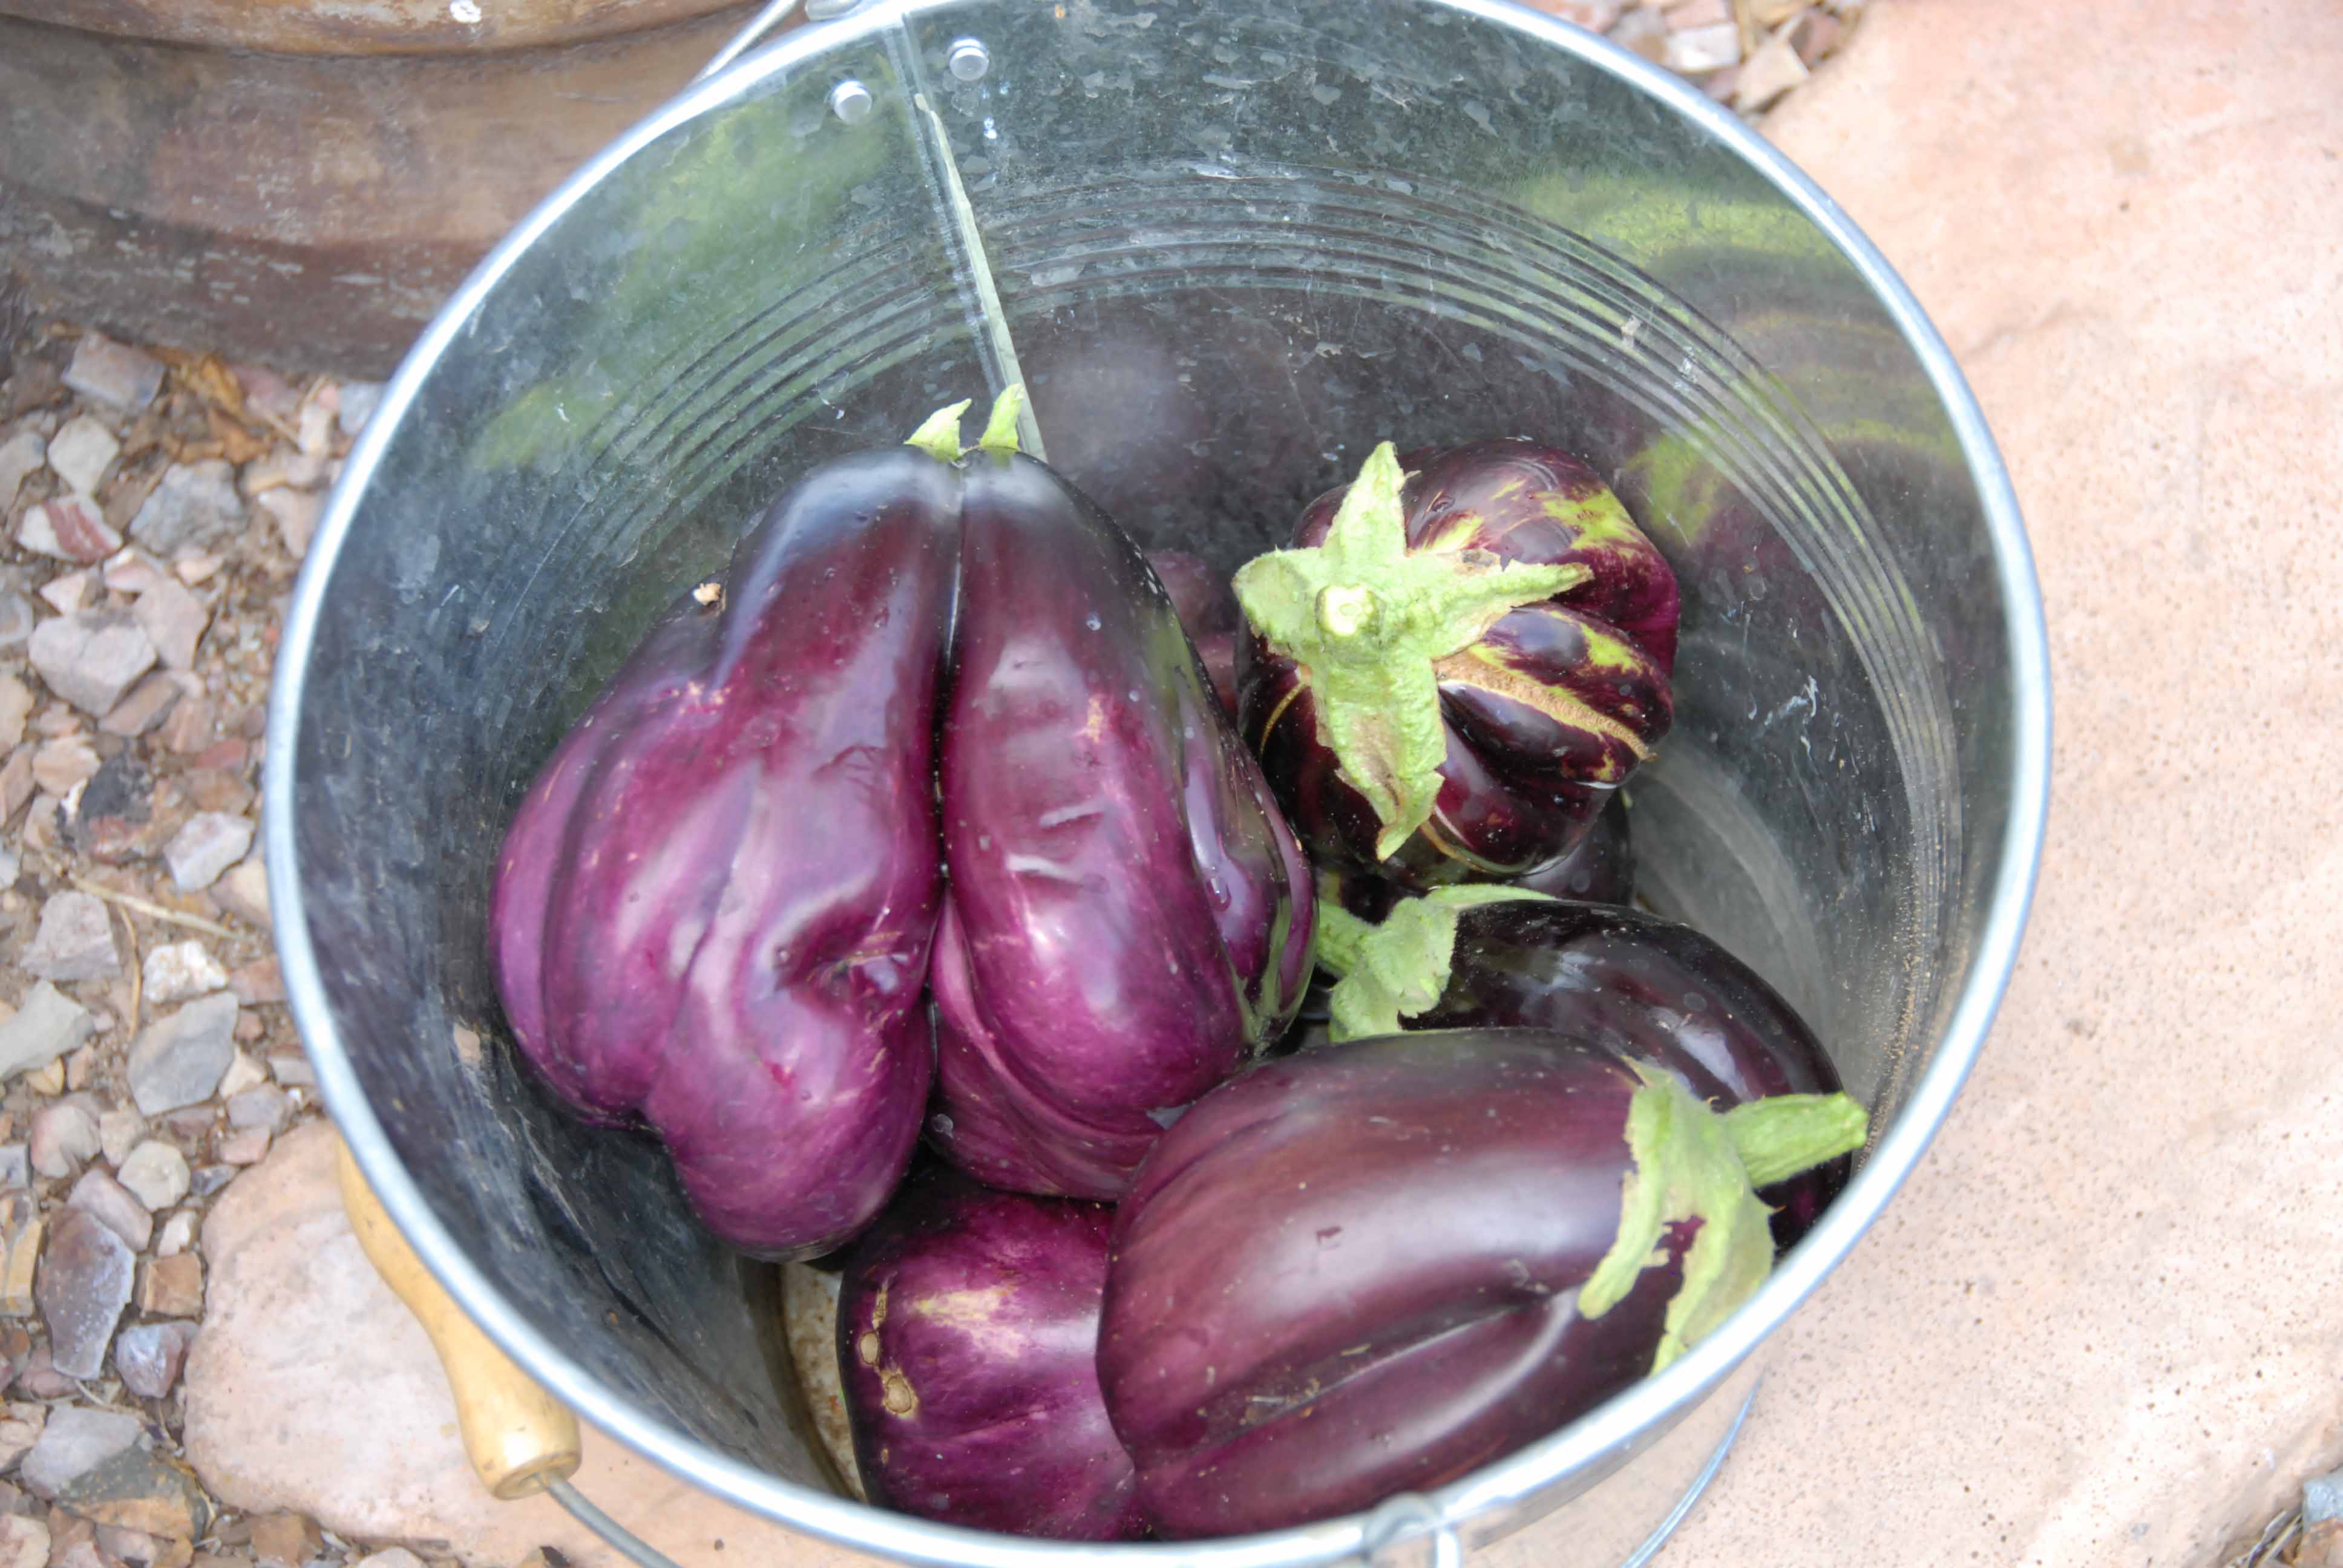 Notice the double eggplant on the left. It probably had a double bloom that was fertilized.